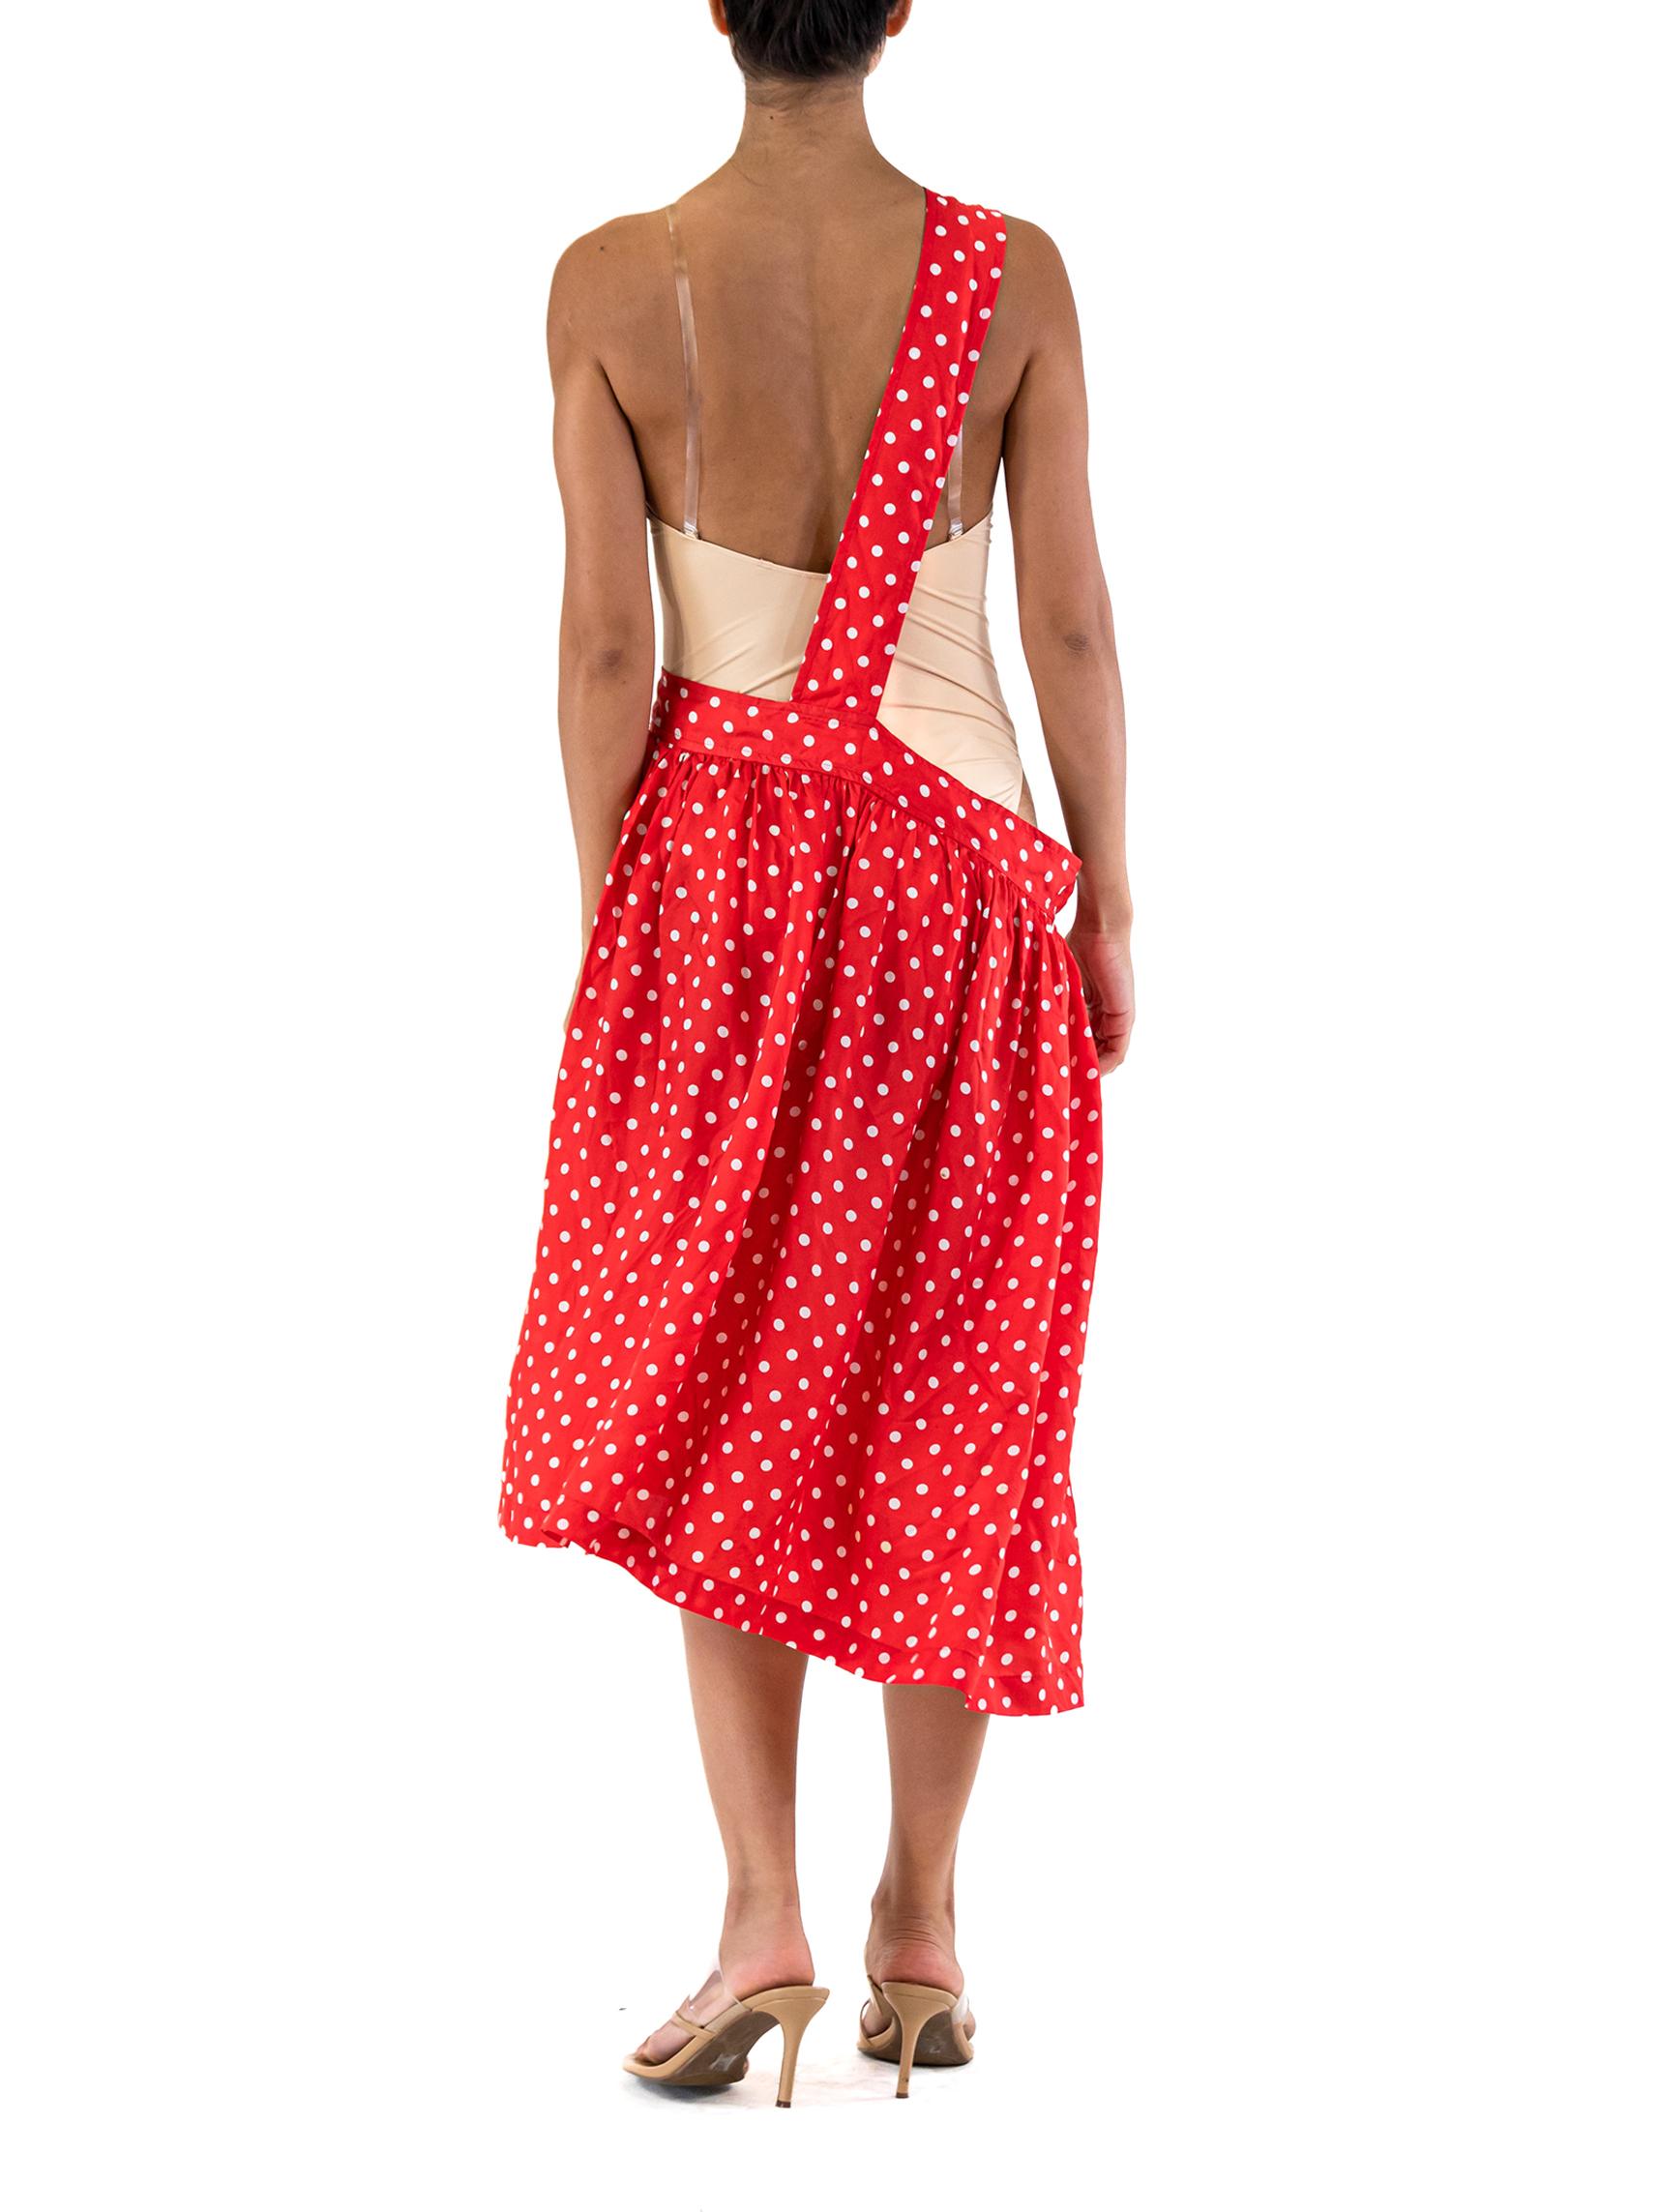 2000S COMME DES GARCONS Red & White Rayon Polka Dot Skirt For Sale 3